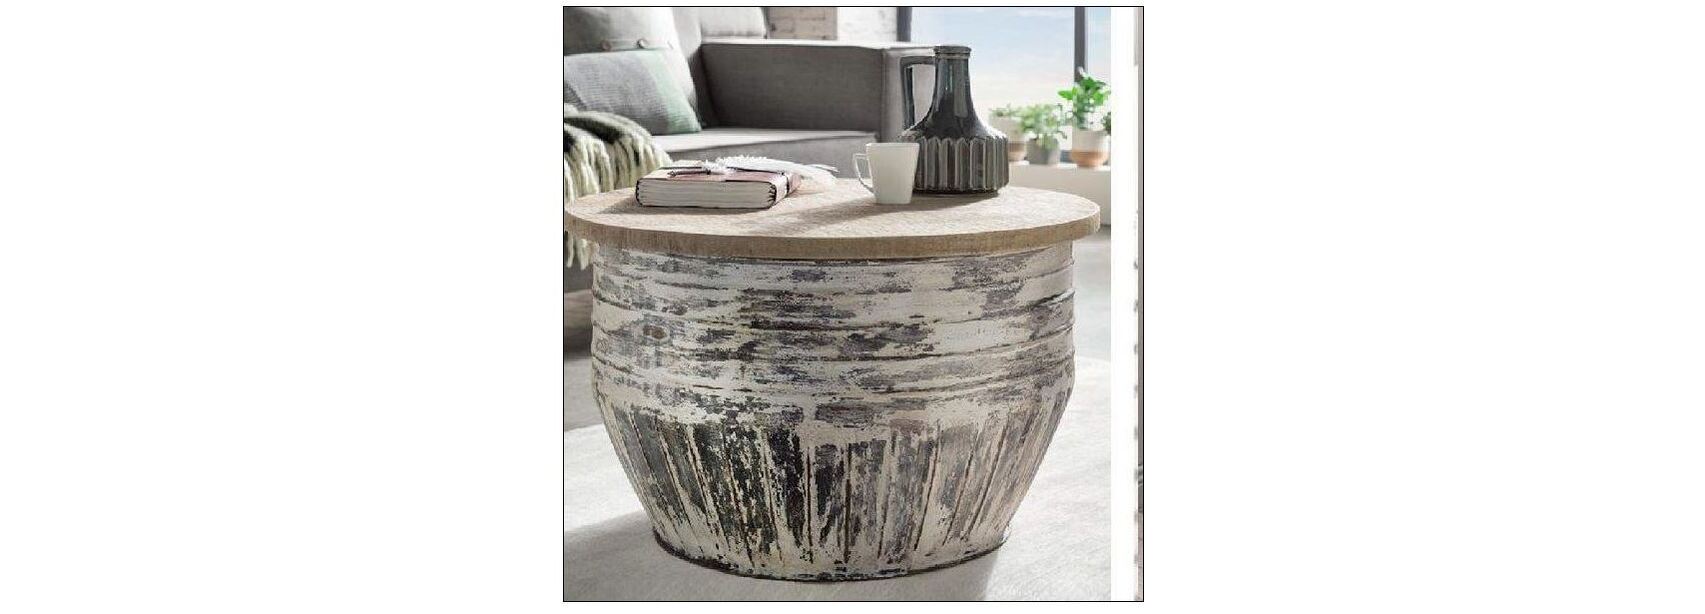 FROM PHIL BEE INTERIORS